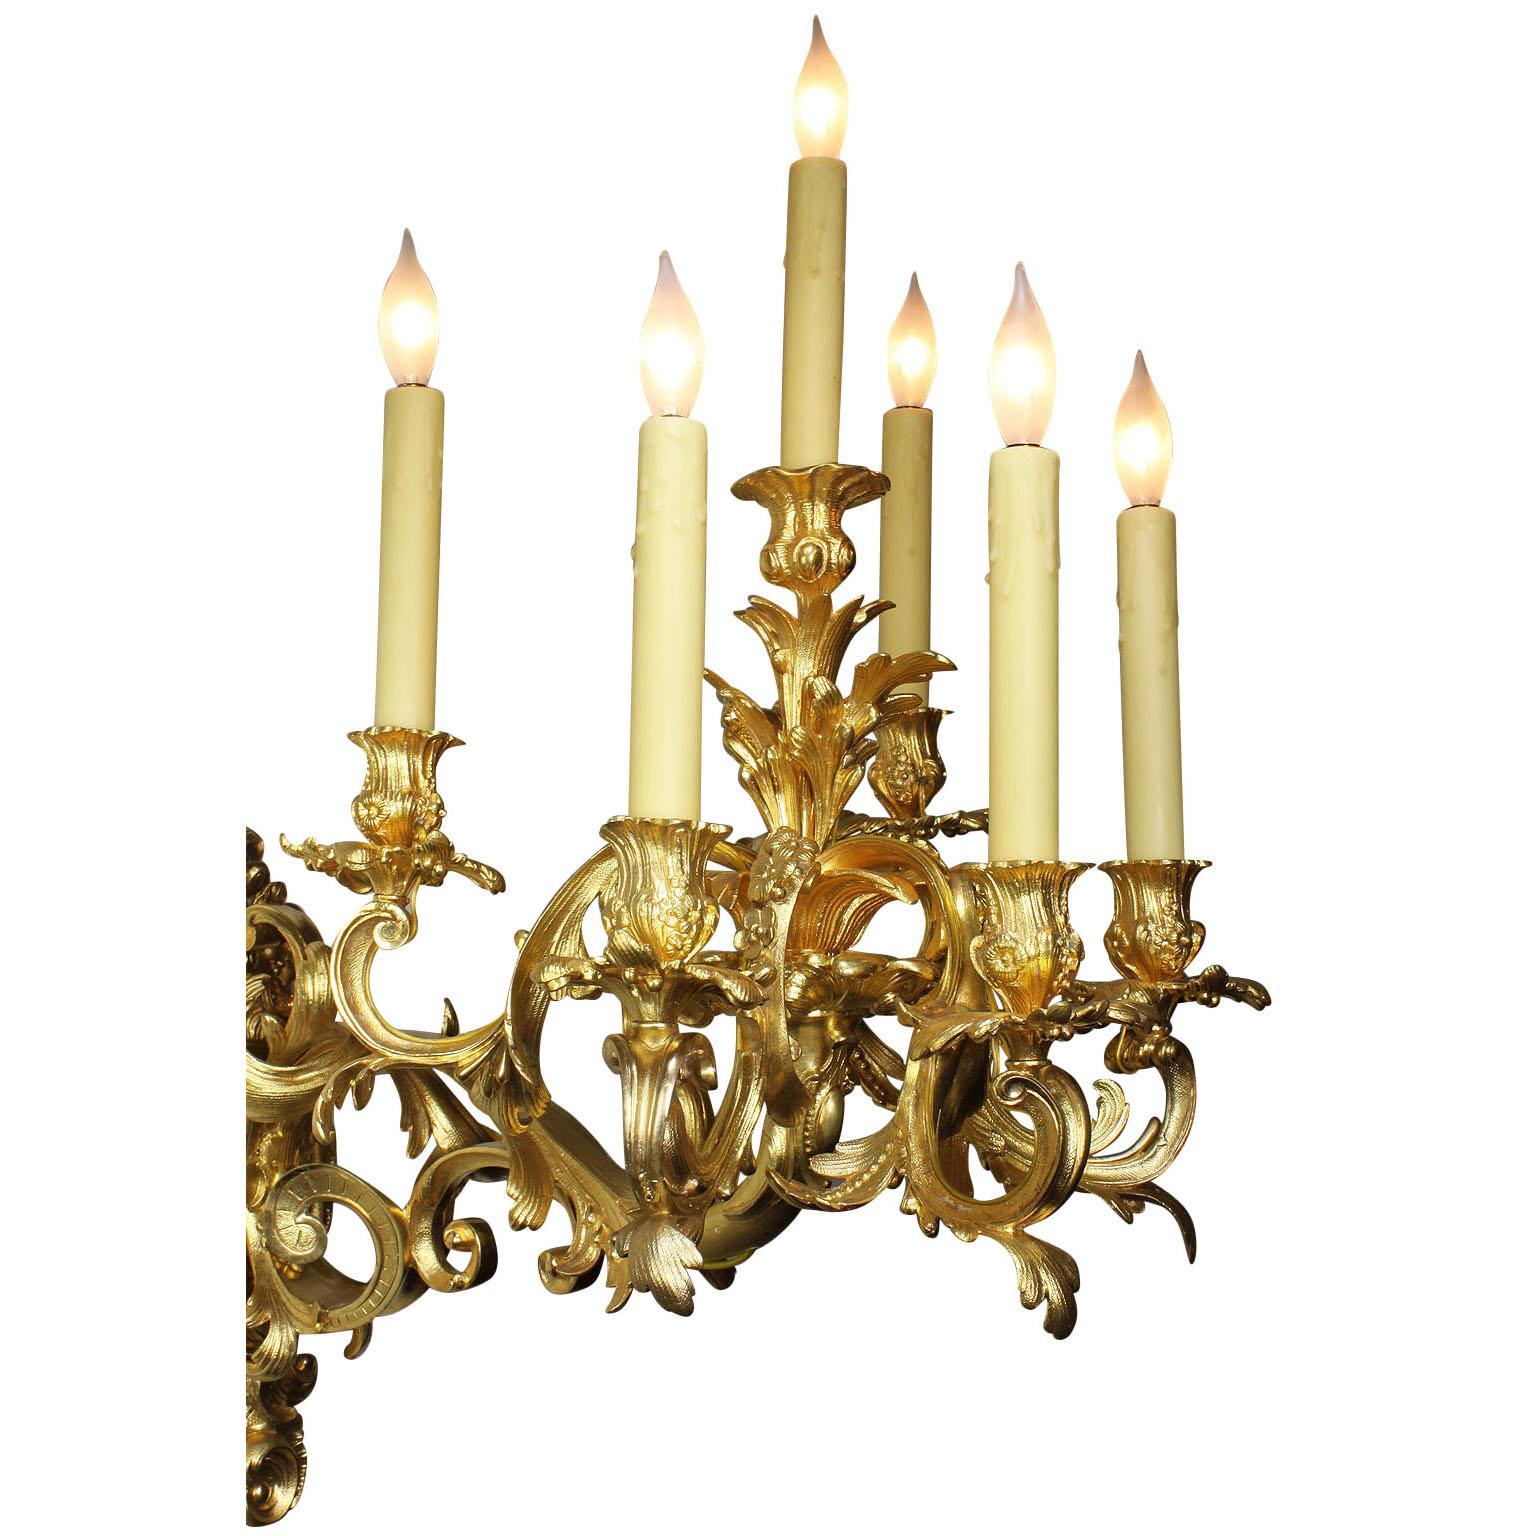 French 19th Century Louis XV Style Rococo Gilt-Bronze Wall Lights Sconces, Pair For Sale 4